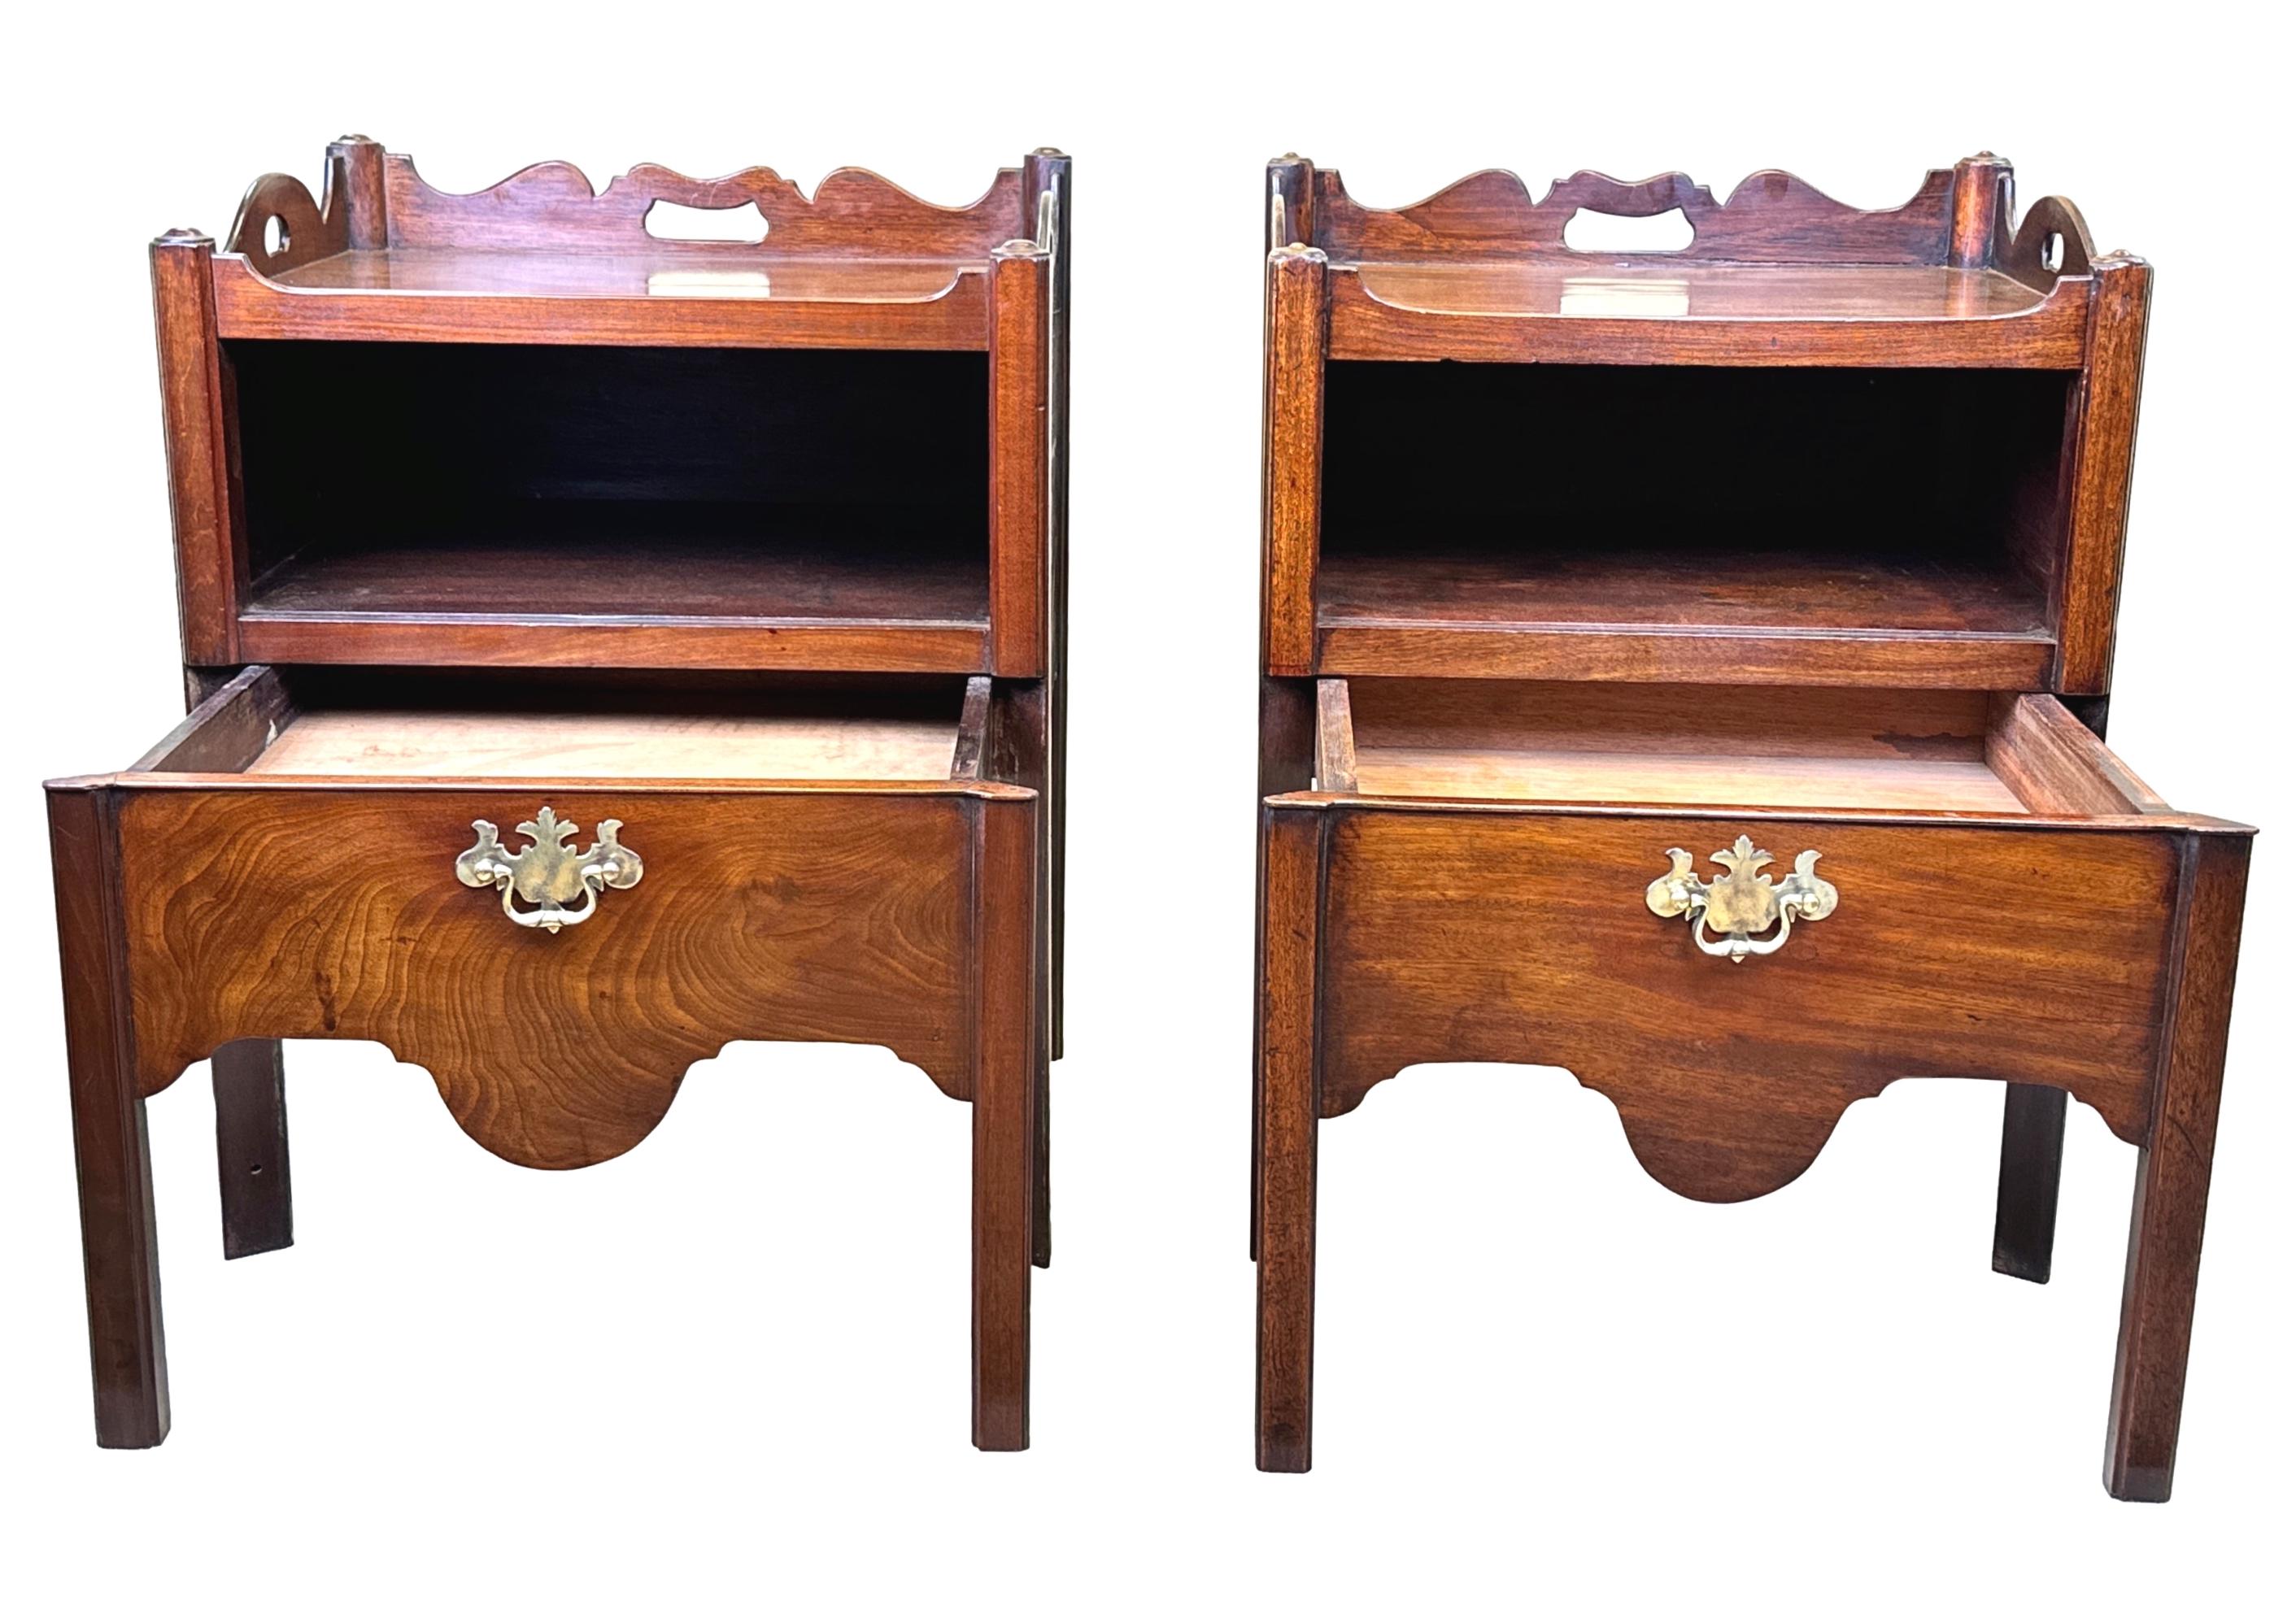 A Very Good Quality And Extremely Well Matched Pair Of 18th Century, George II Period, Mahogany Bedside Night Tables, Or Tray Top Commodes, Having Well Figured Tops With Shaped Gallery Sides And Pierced Handles, Above Unusual Open Storage Cavities